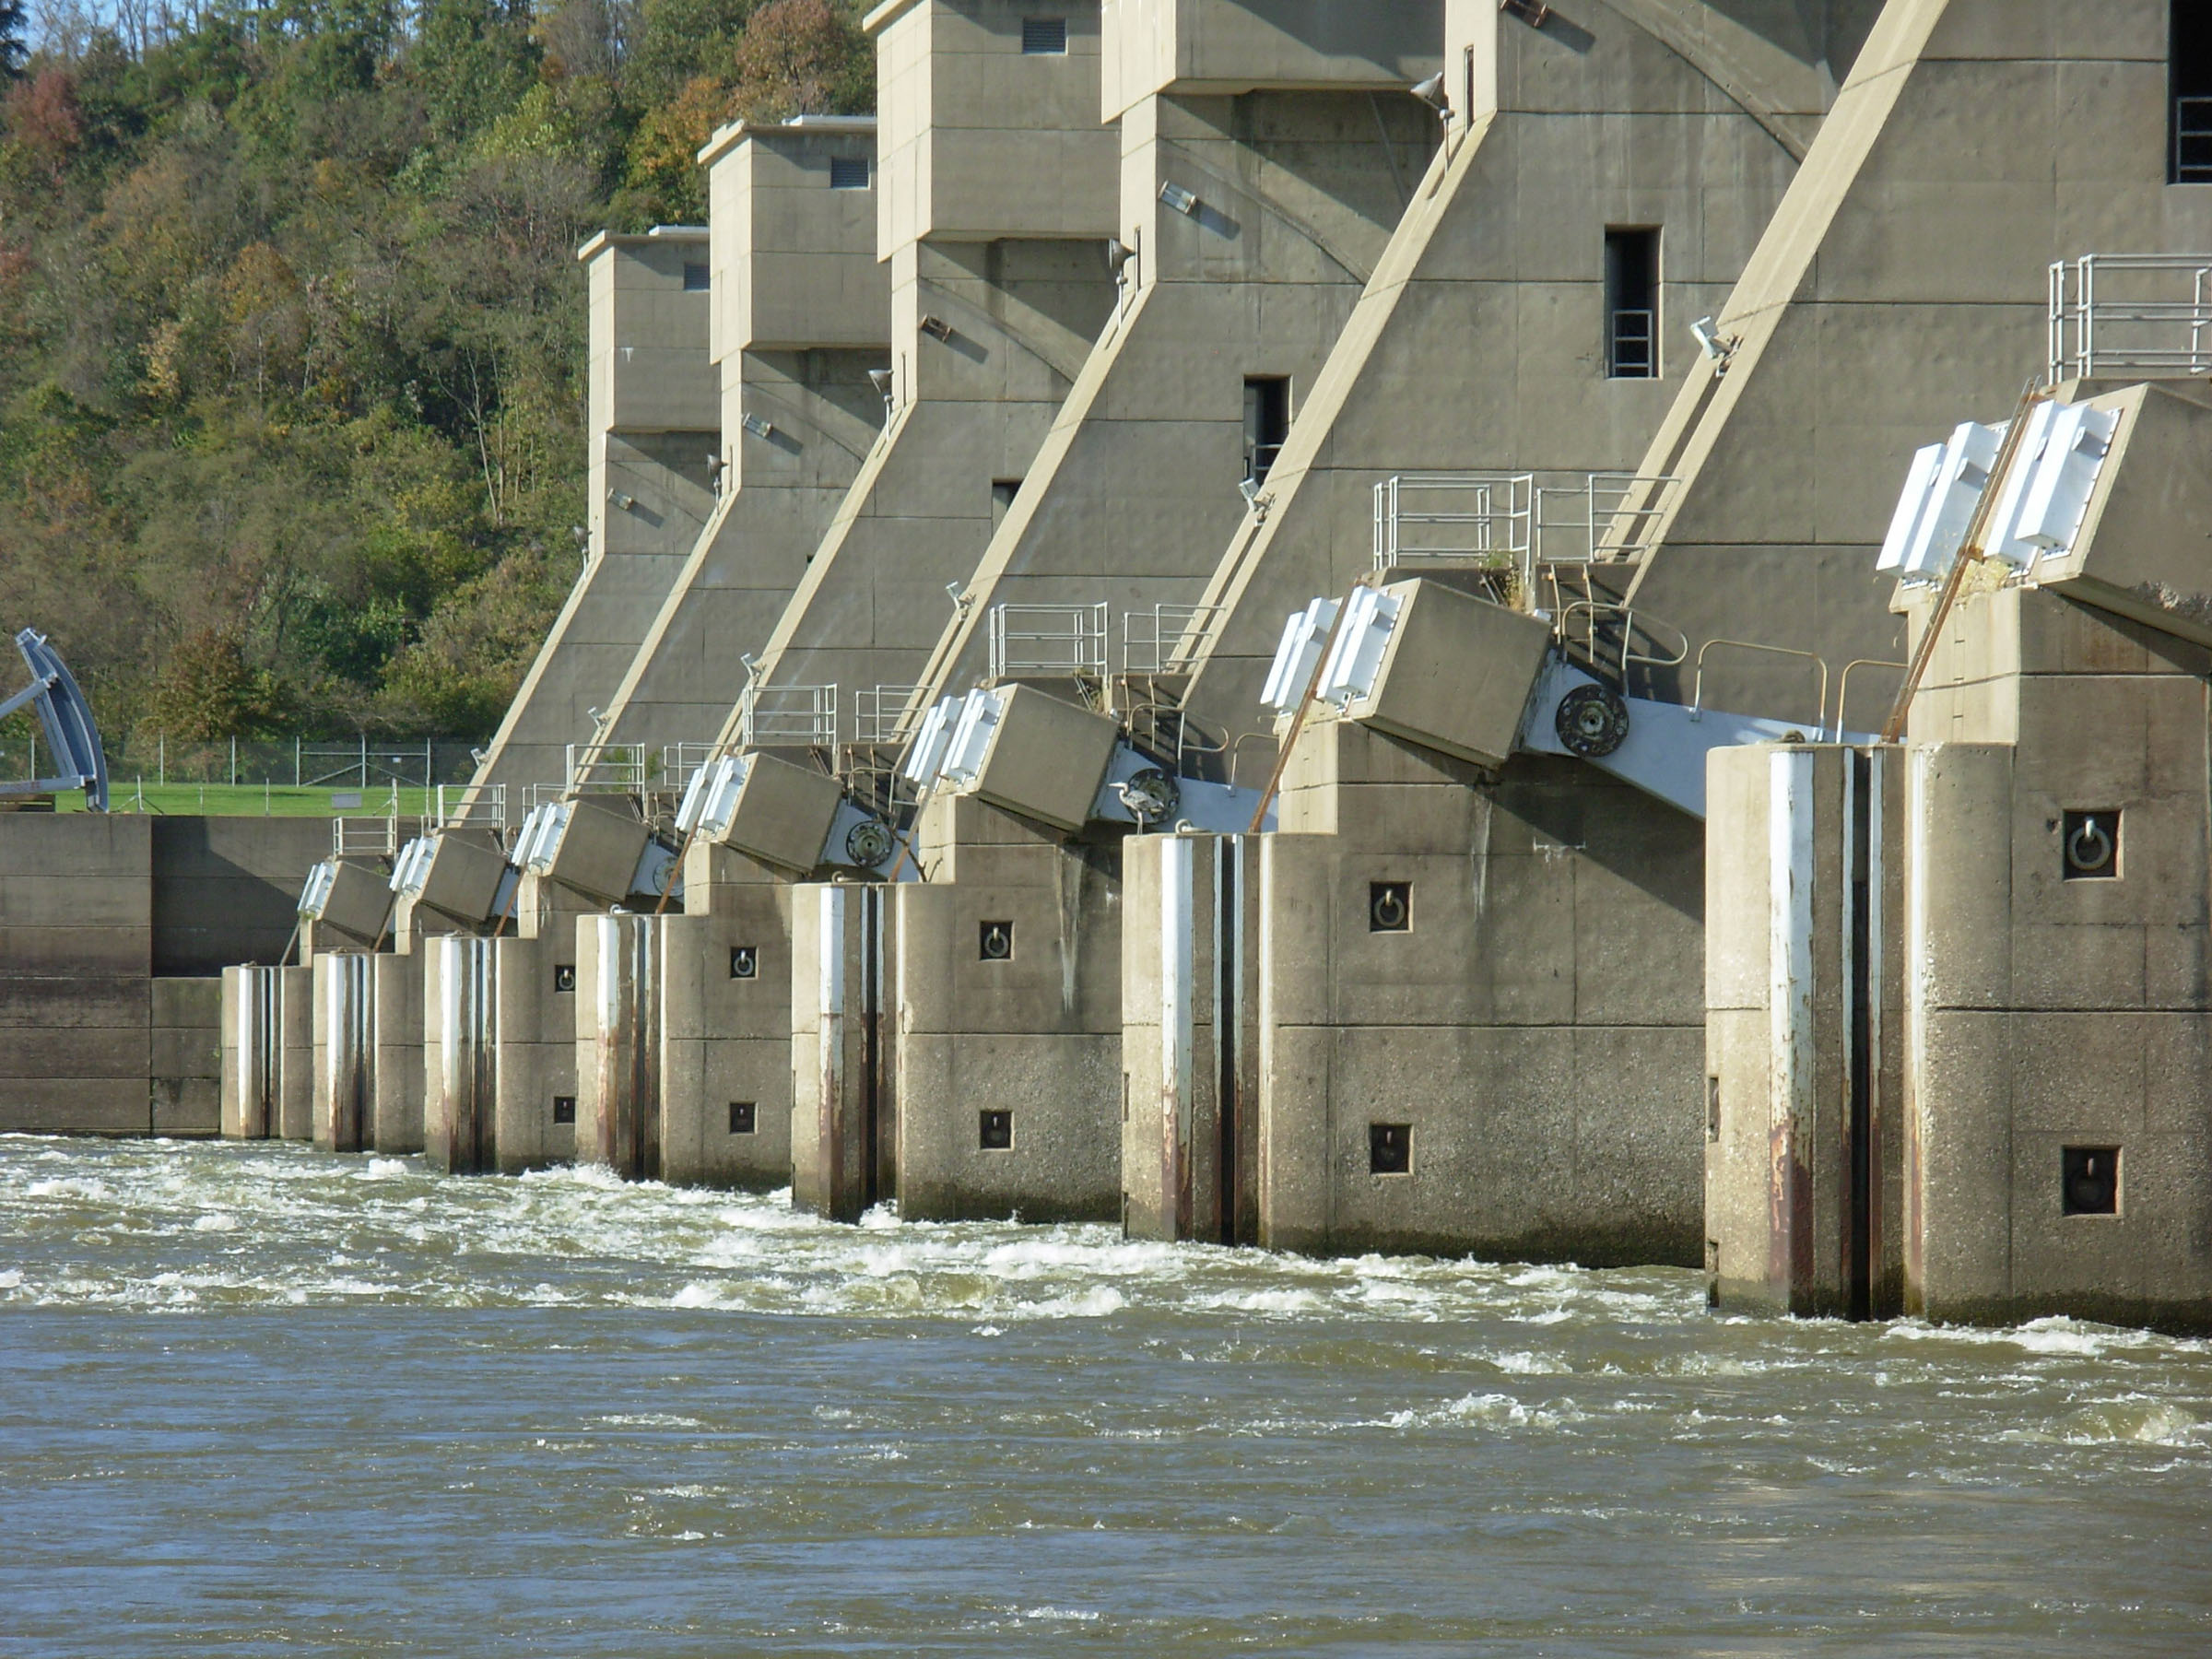 Hydropower engineers: what's next?